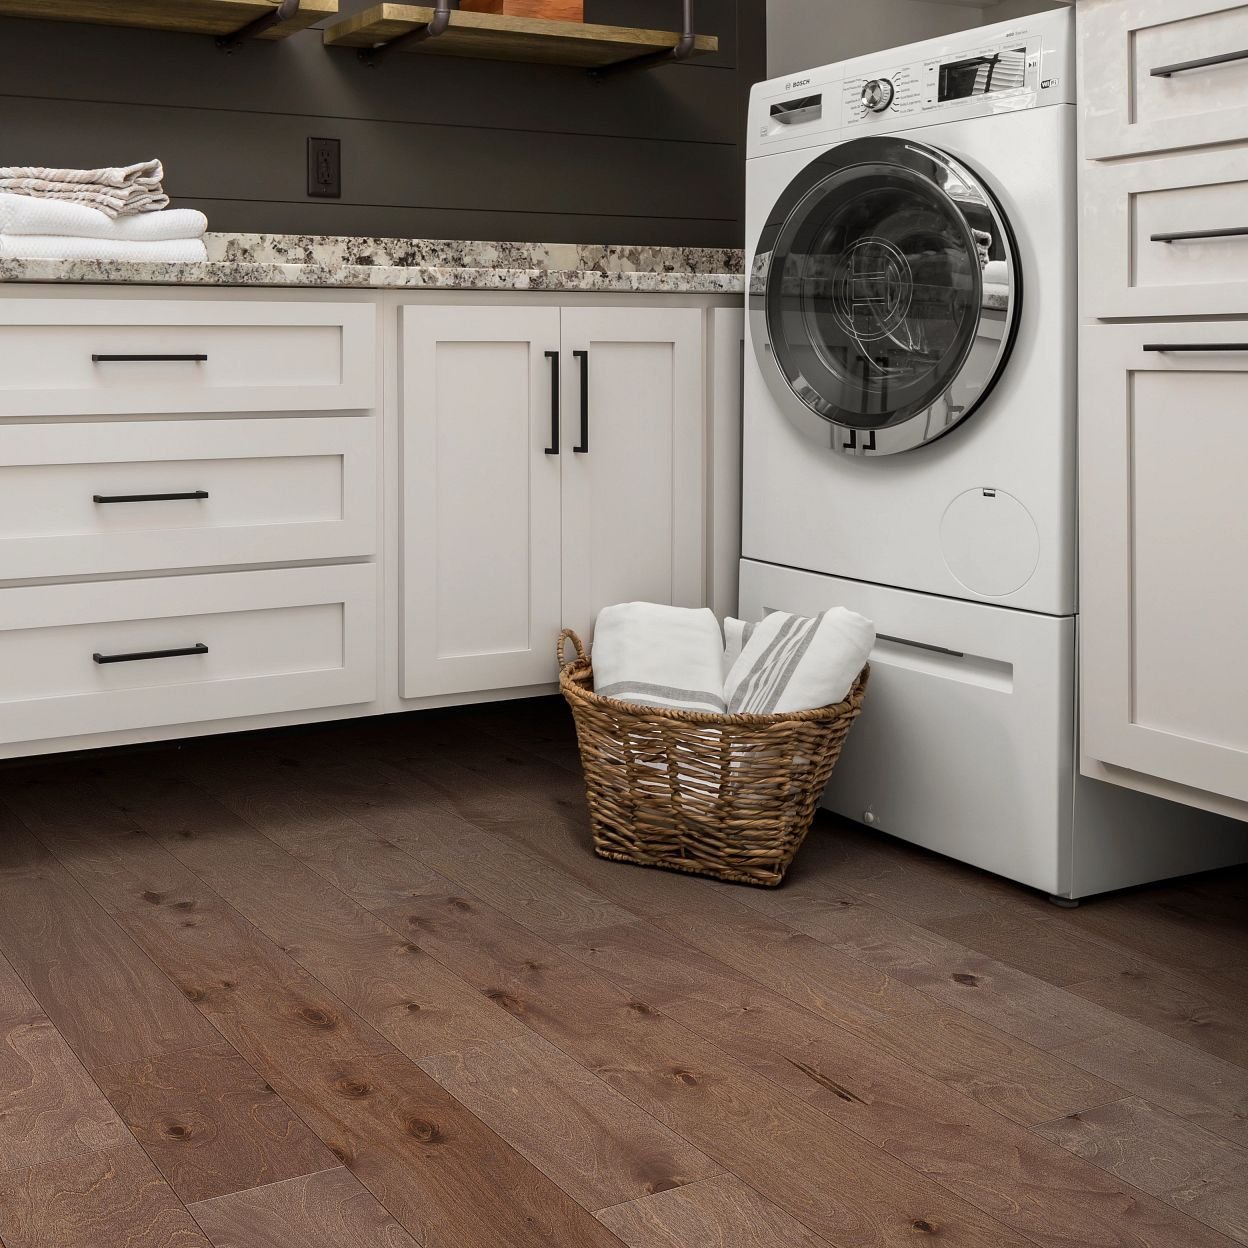 Kitchen with a basket of laundry on hardwood flooring from Value Flooring Kitchens & Baths in Cleveland, TN